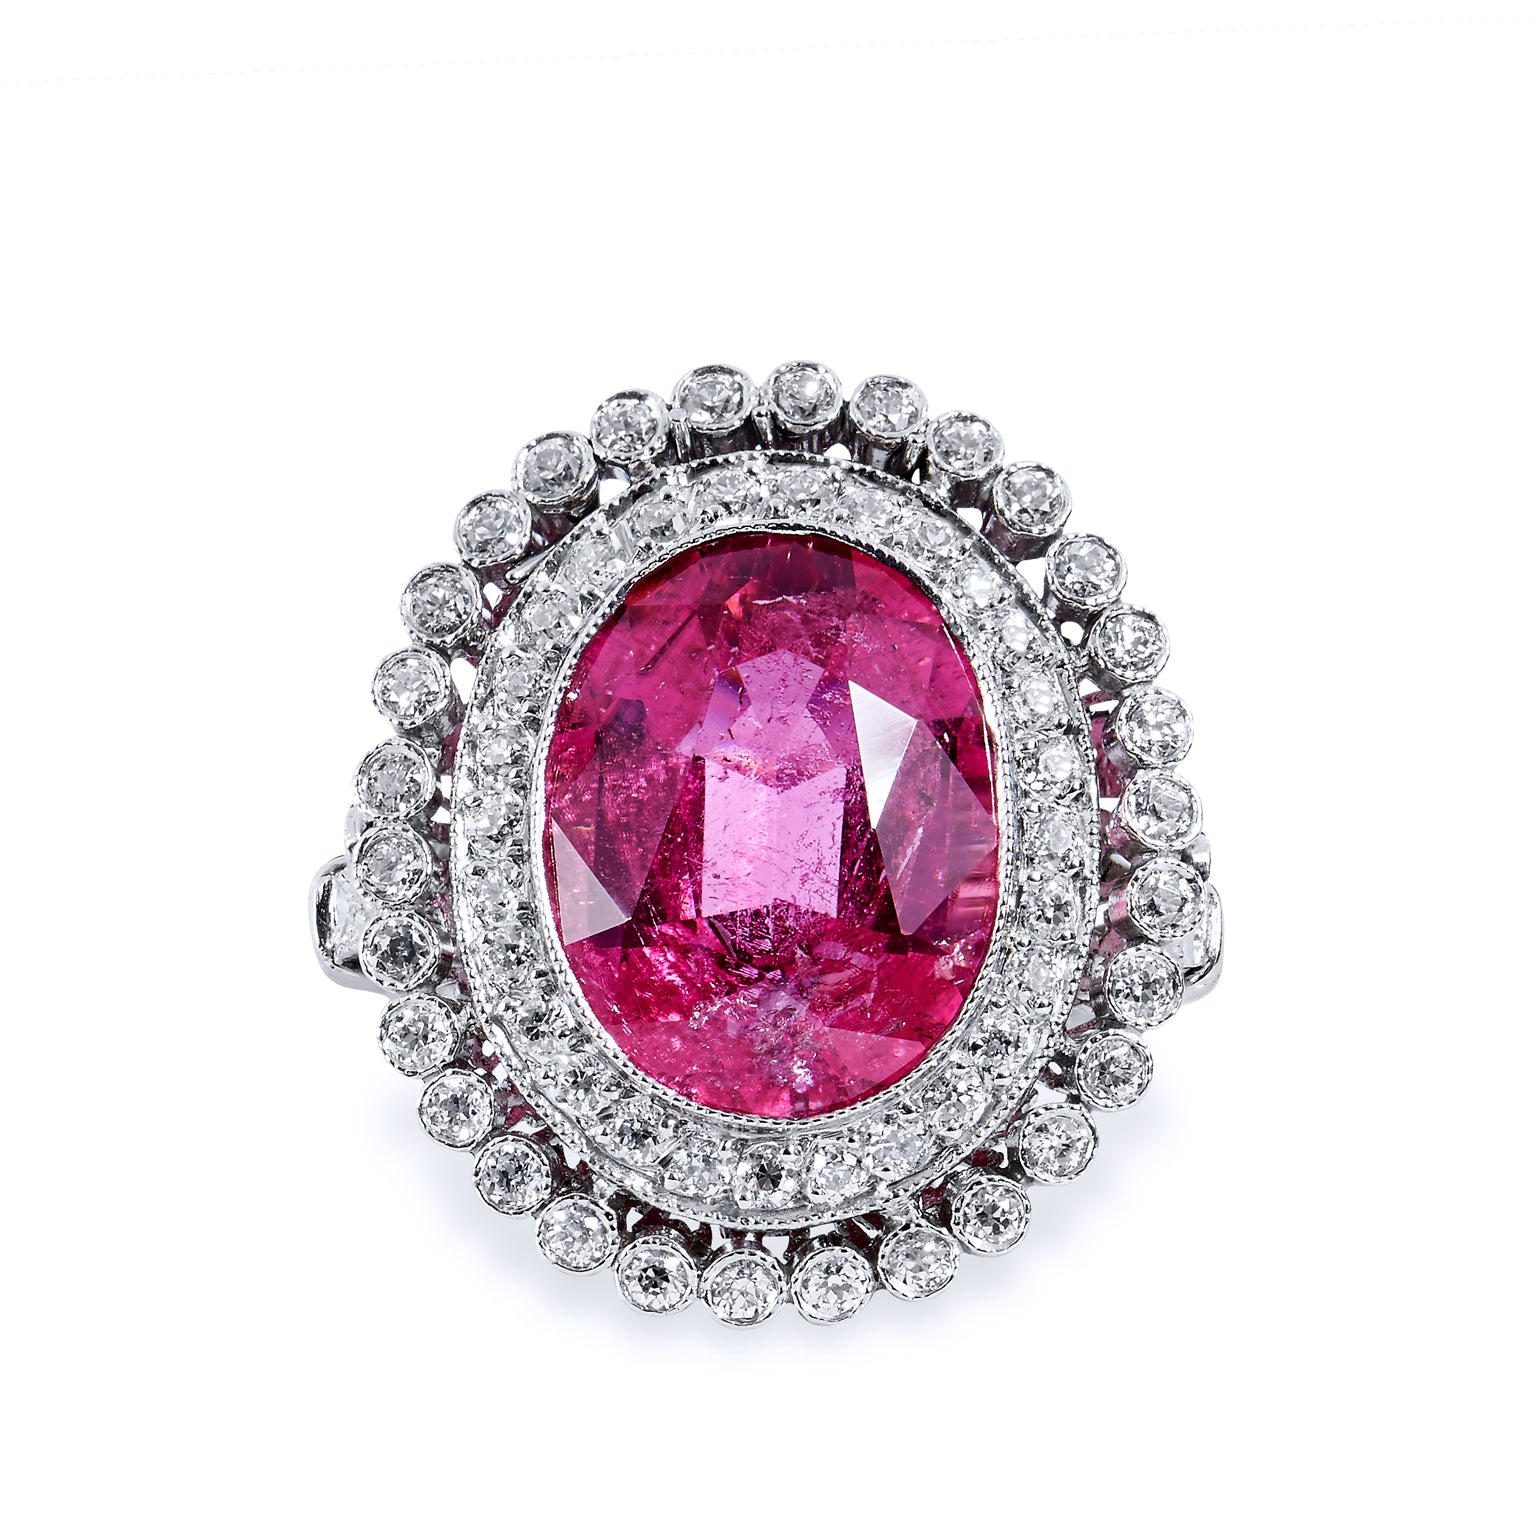 Art Deco Style Pink Tourmaline Cocktail Ring Rings Curated by H